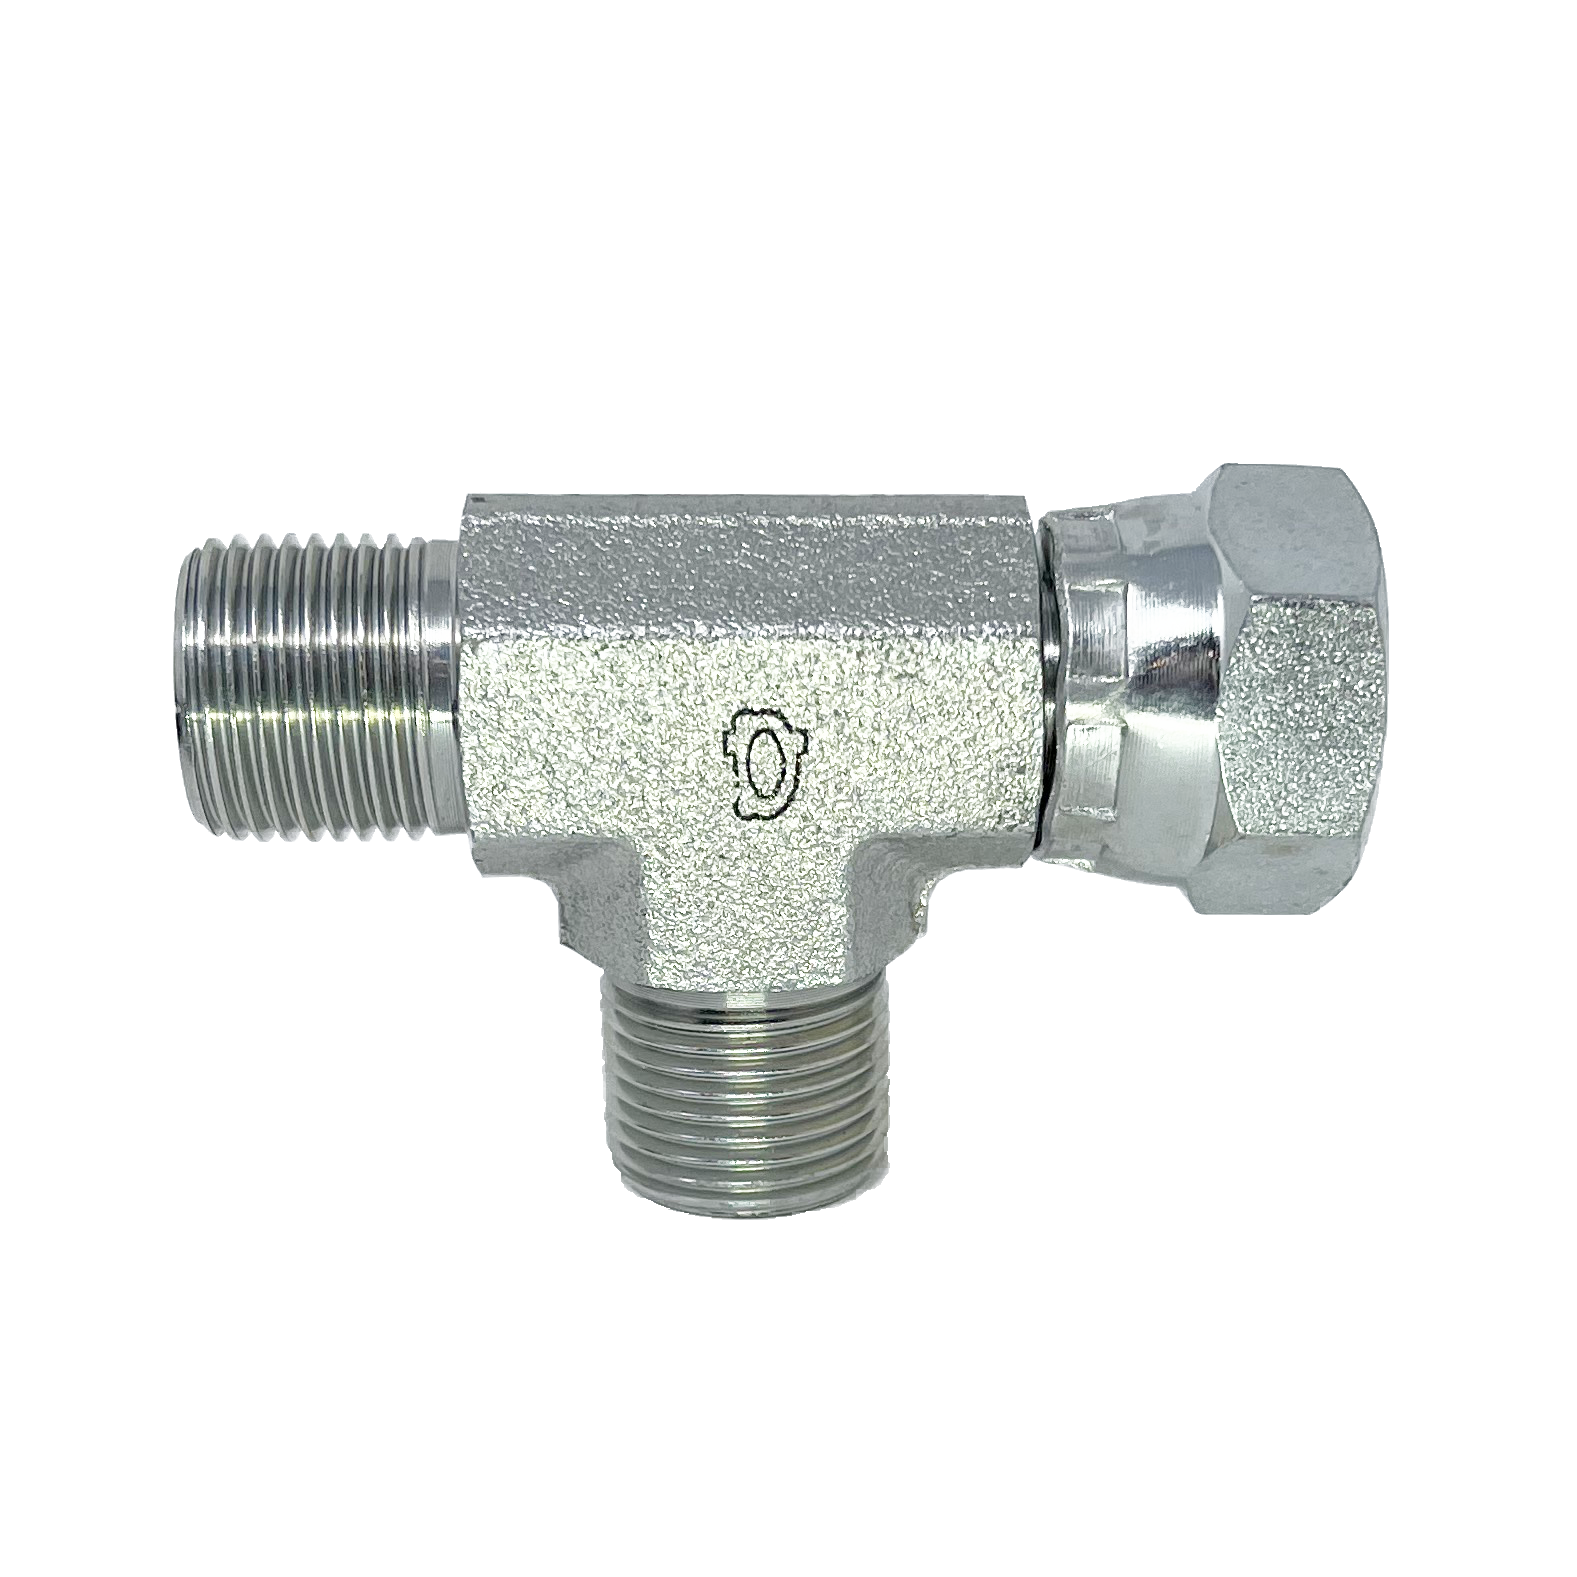 9090-10-10-10 : Adaptall Tee Adapter, Male 0.625 (5/8") BSPP x Female 0.625 (5/8") BSPP x Male 0.625 (5/8") BSPP, Carbon Steel